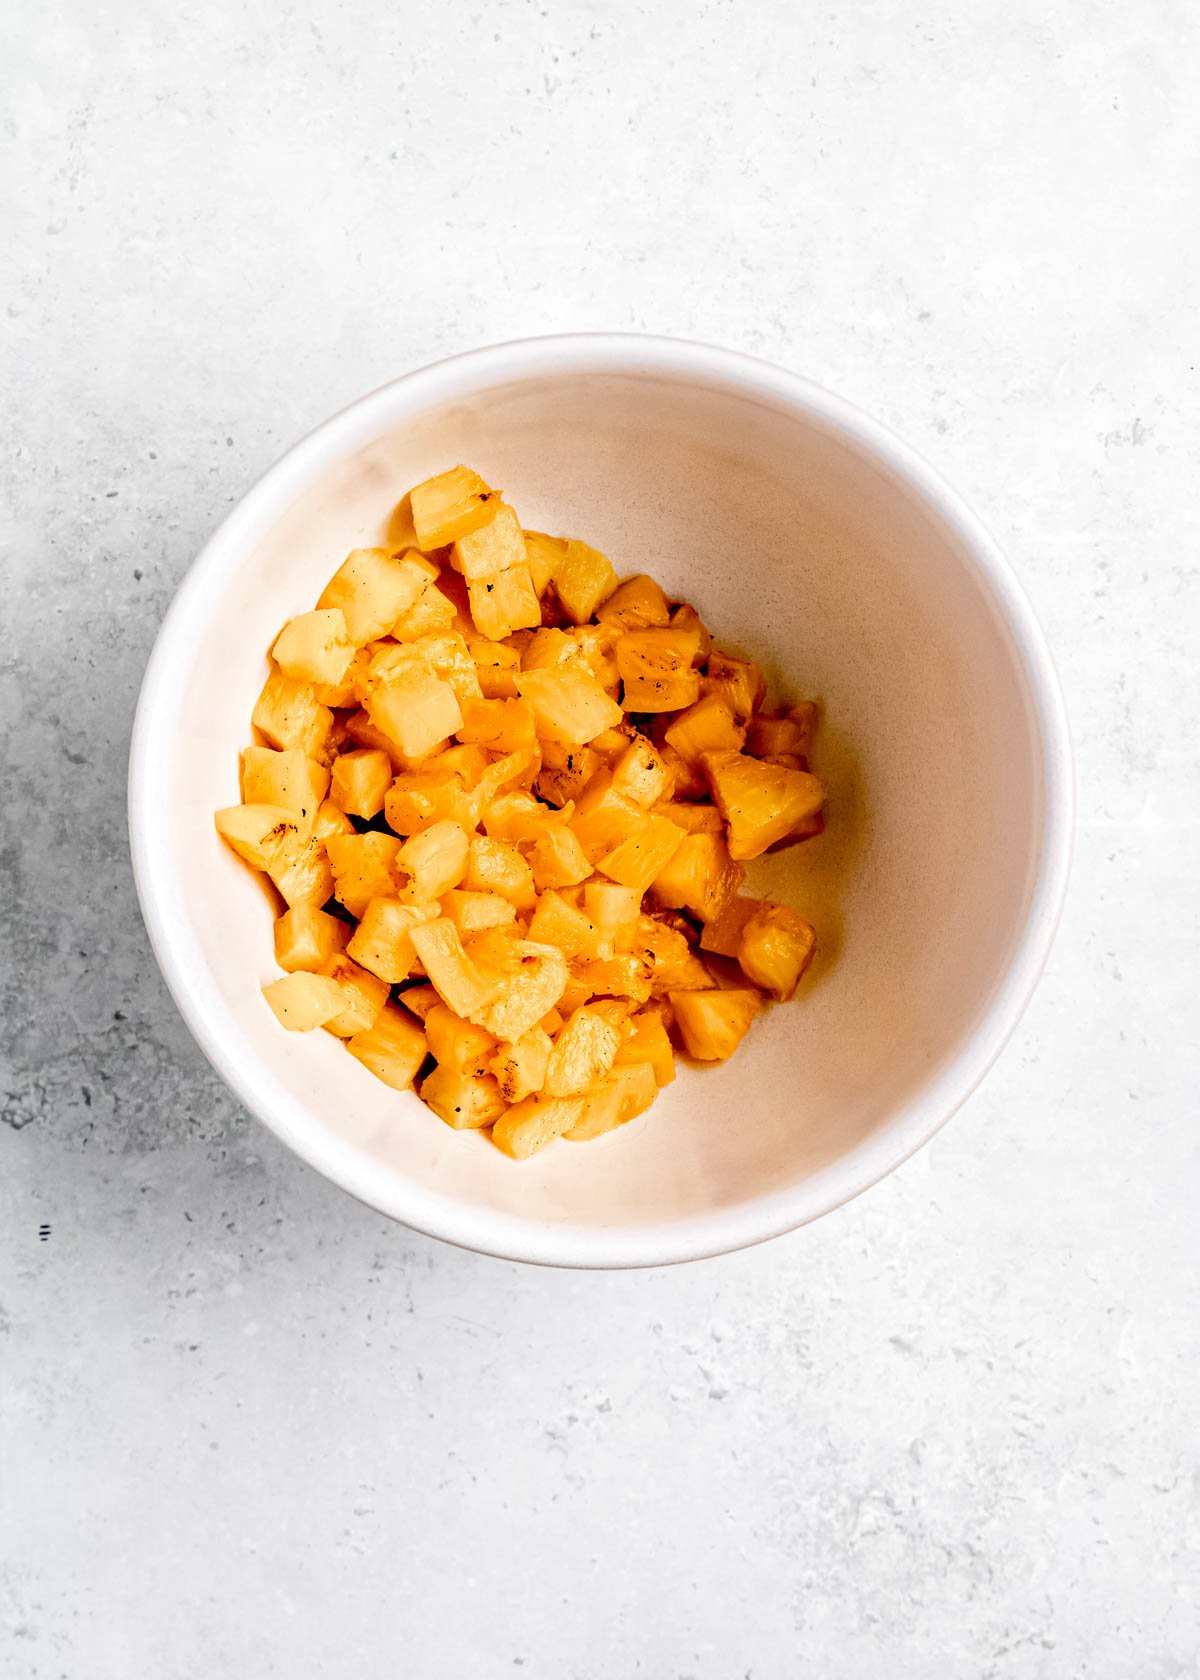 diced pineapple in a white bowl with rind removed